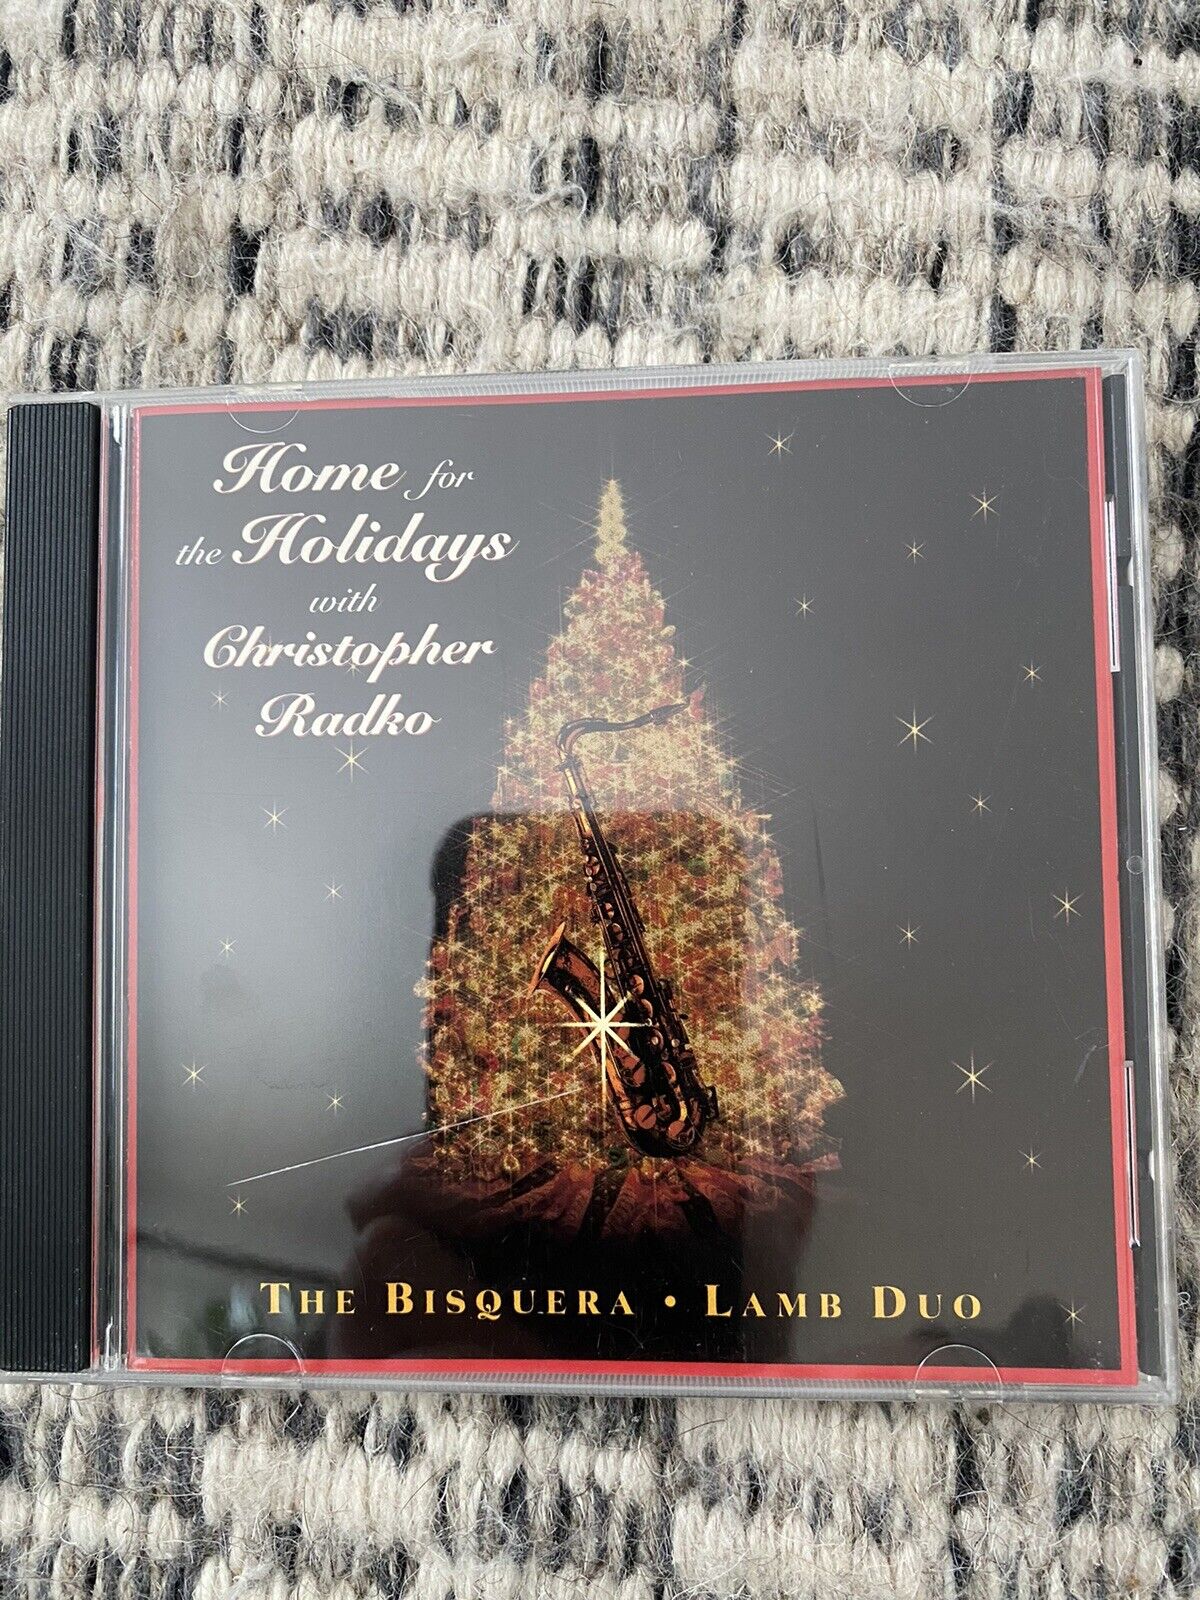 Christopher Radko - Home for the Holidays The Bisquera Lamb Duo (CD 1996) Seale 